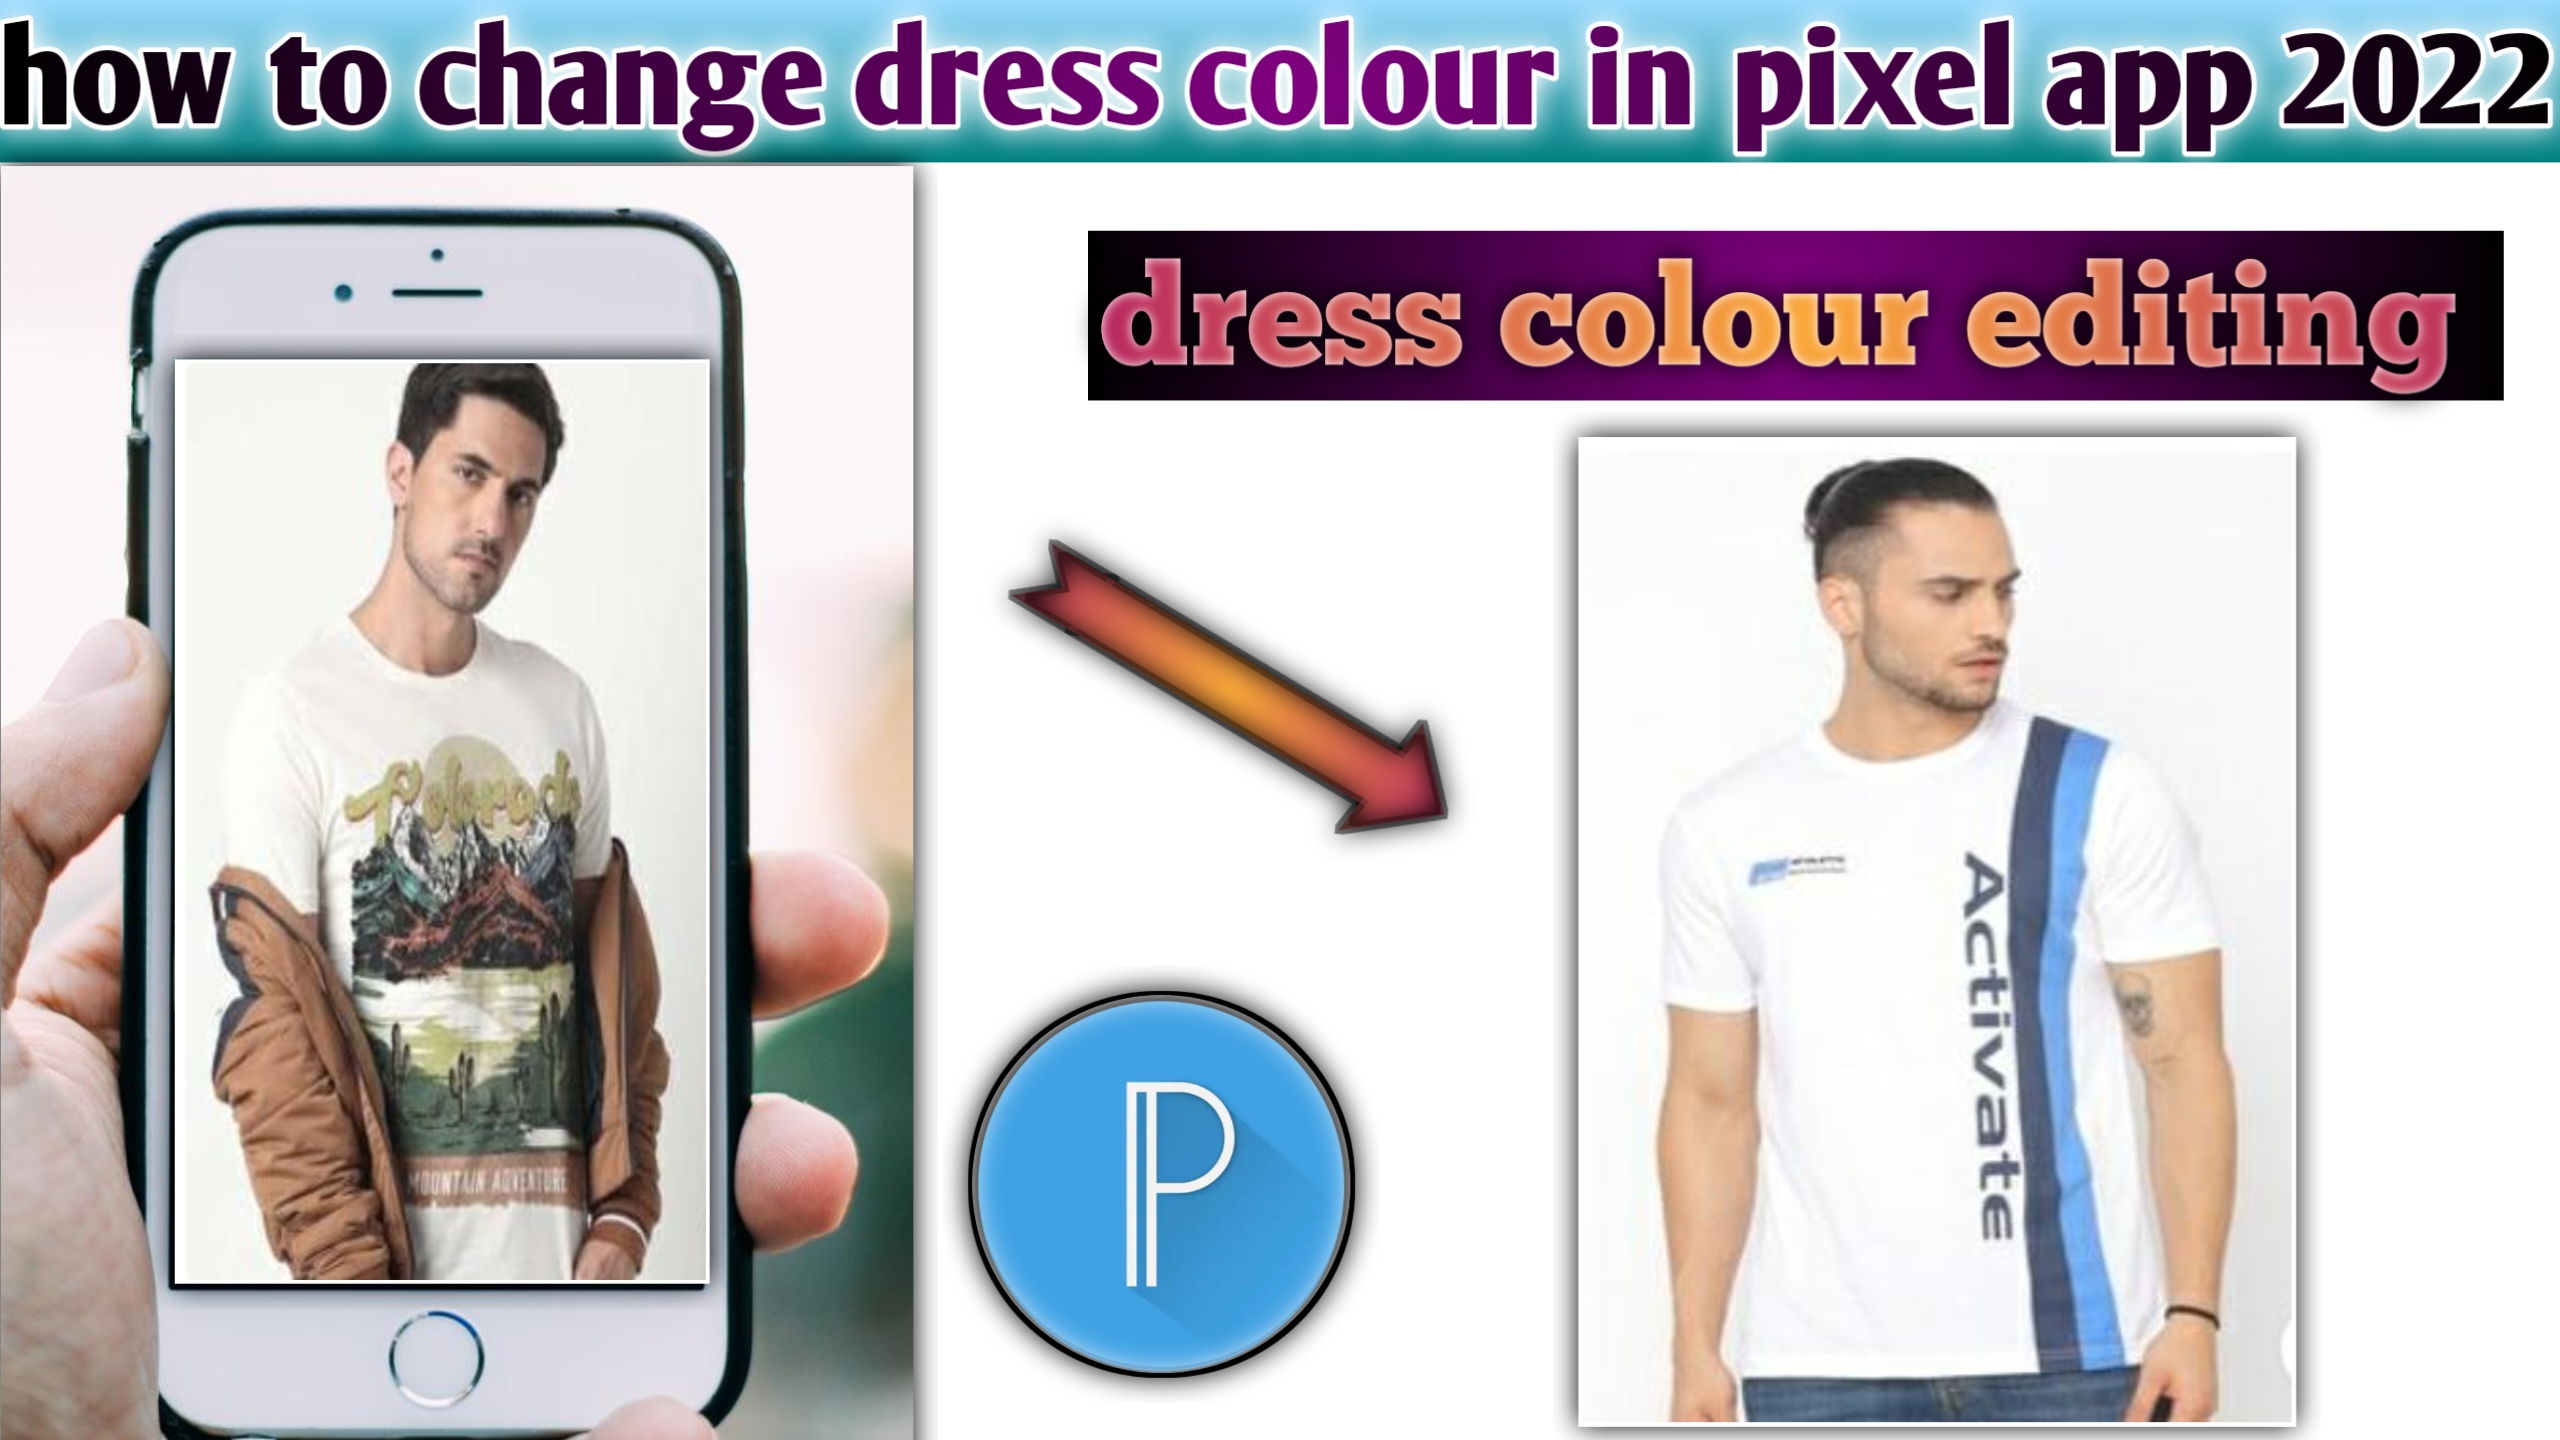 video - Can this dress change colour dynamically? - Skeptics Stack Exchange